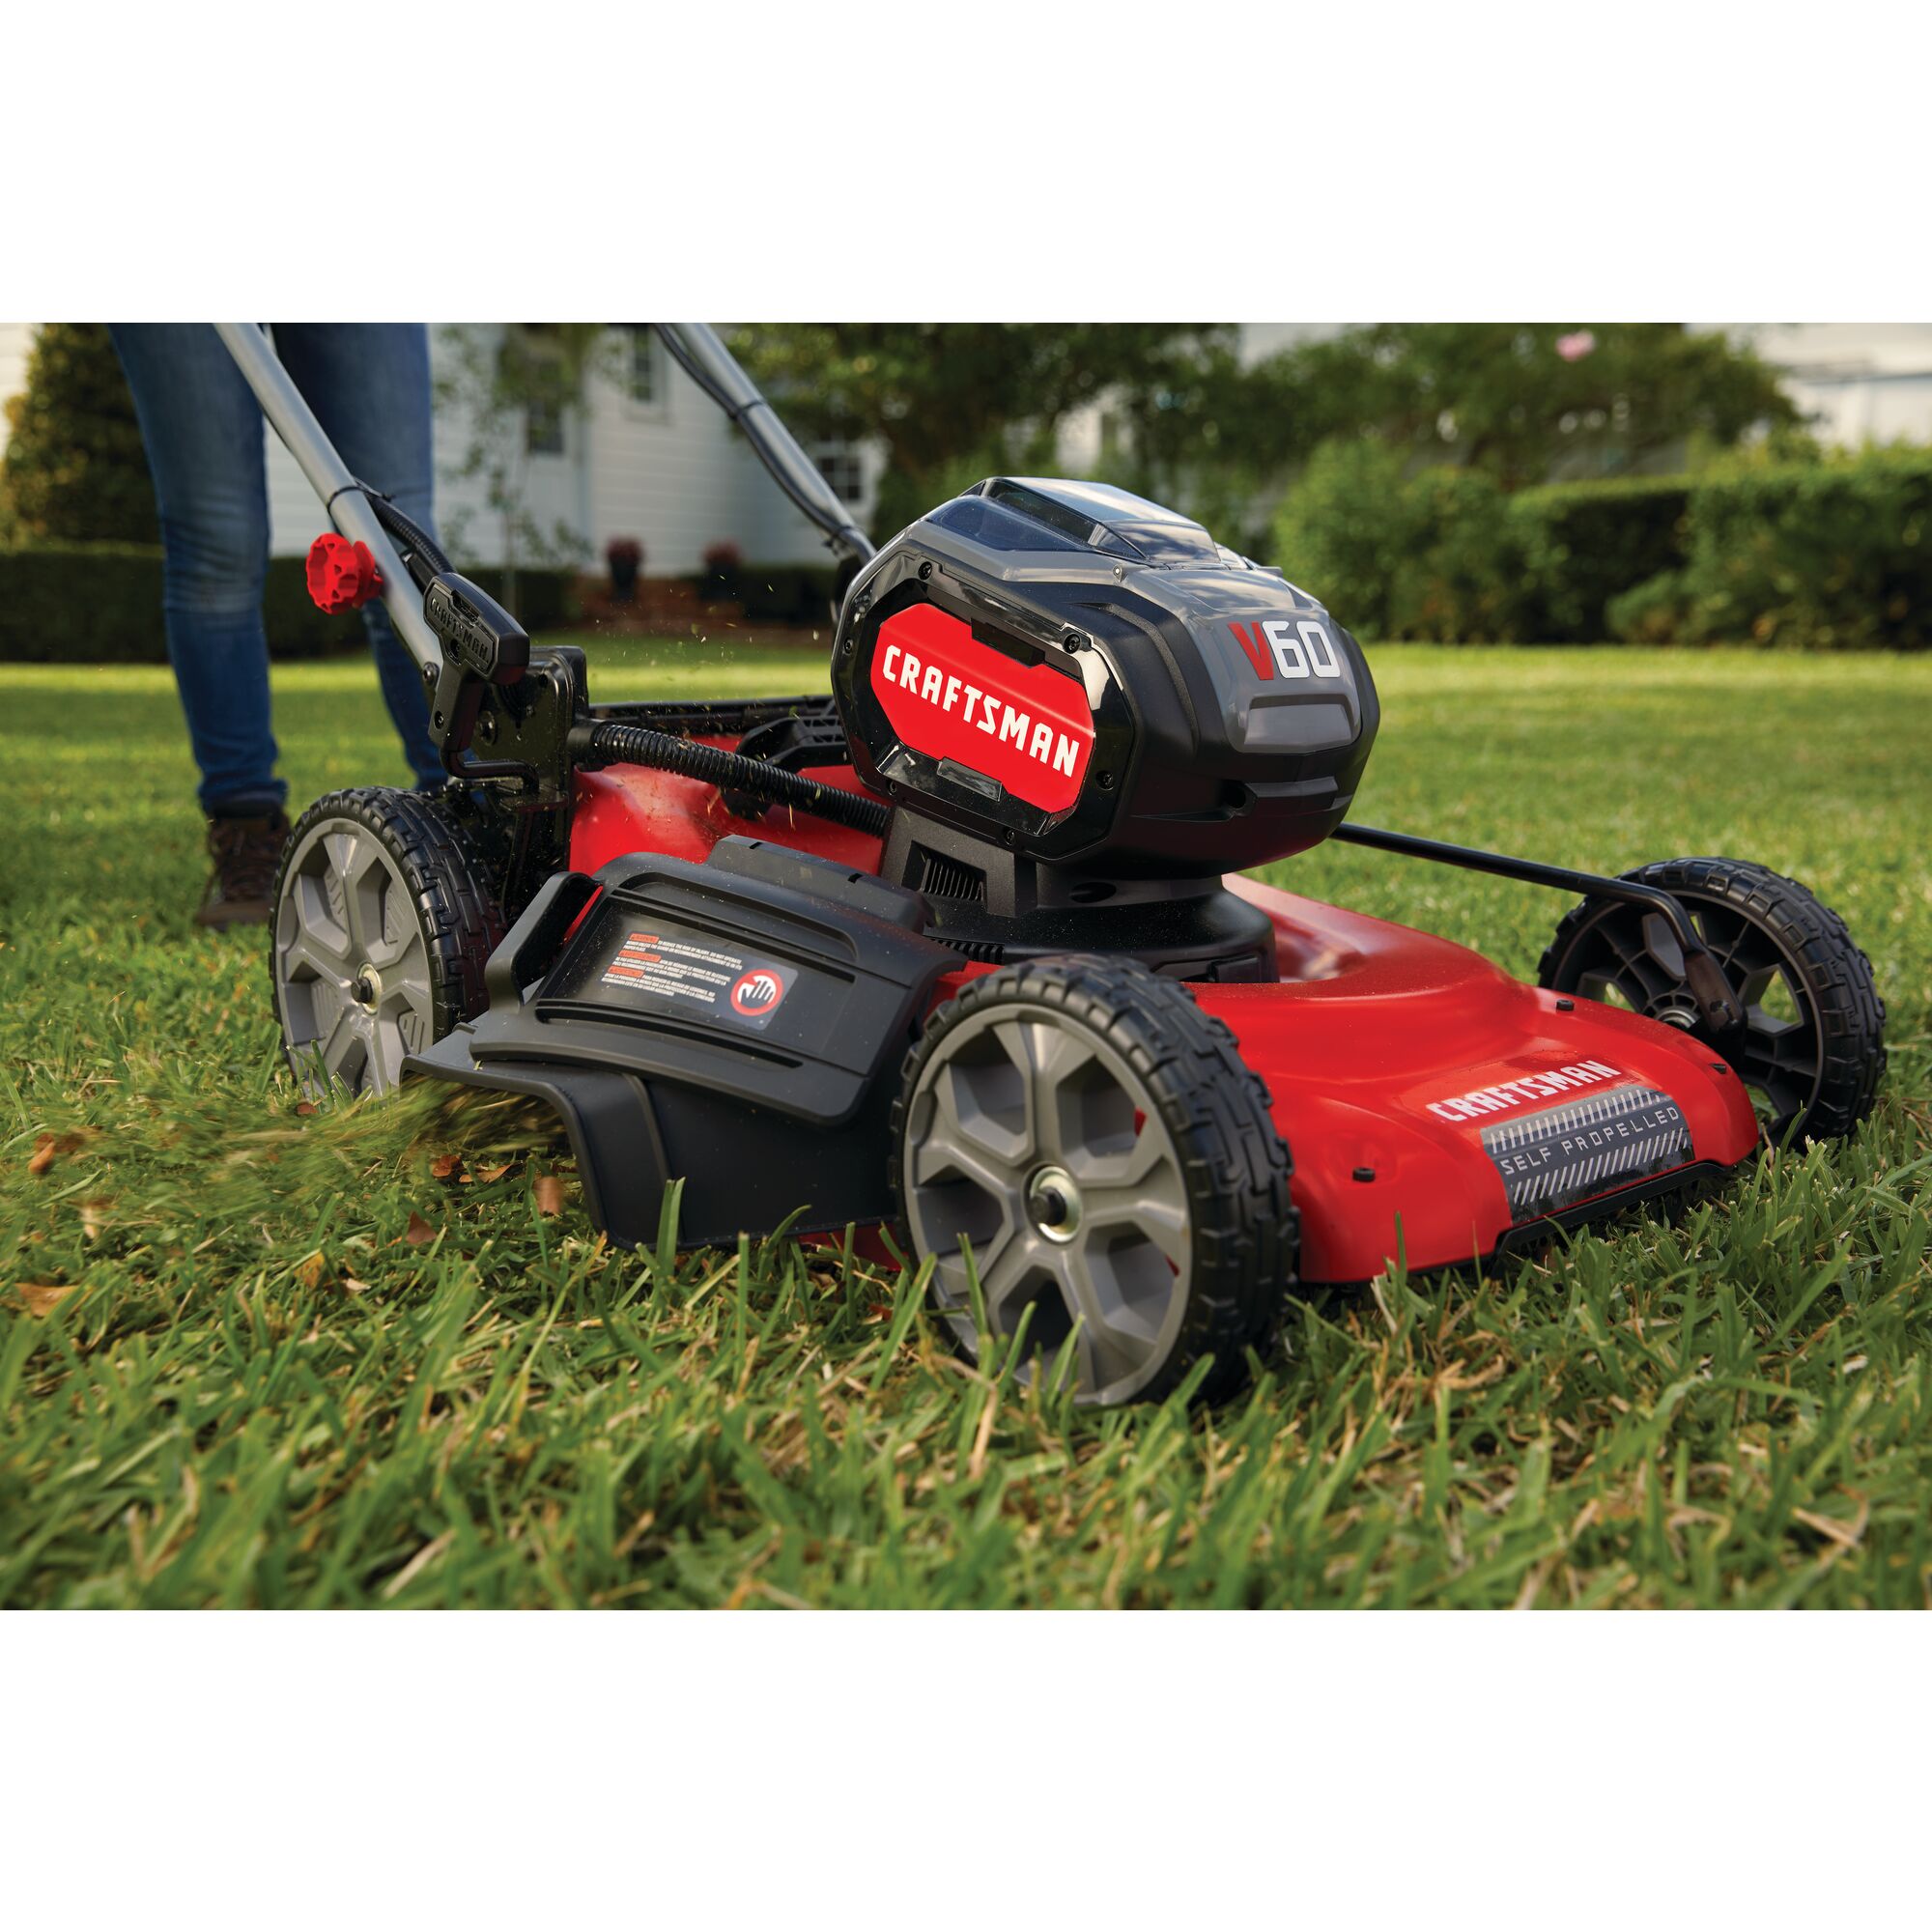 Mulching bagging and side discharging feature of volt 60 cordless 21 inch 3 in 1 self propelled lawn mower kit 7.5 Amp hour.